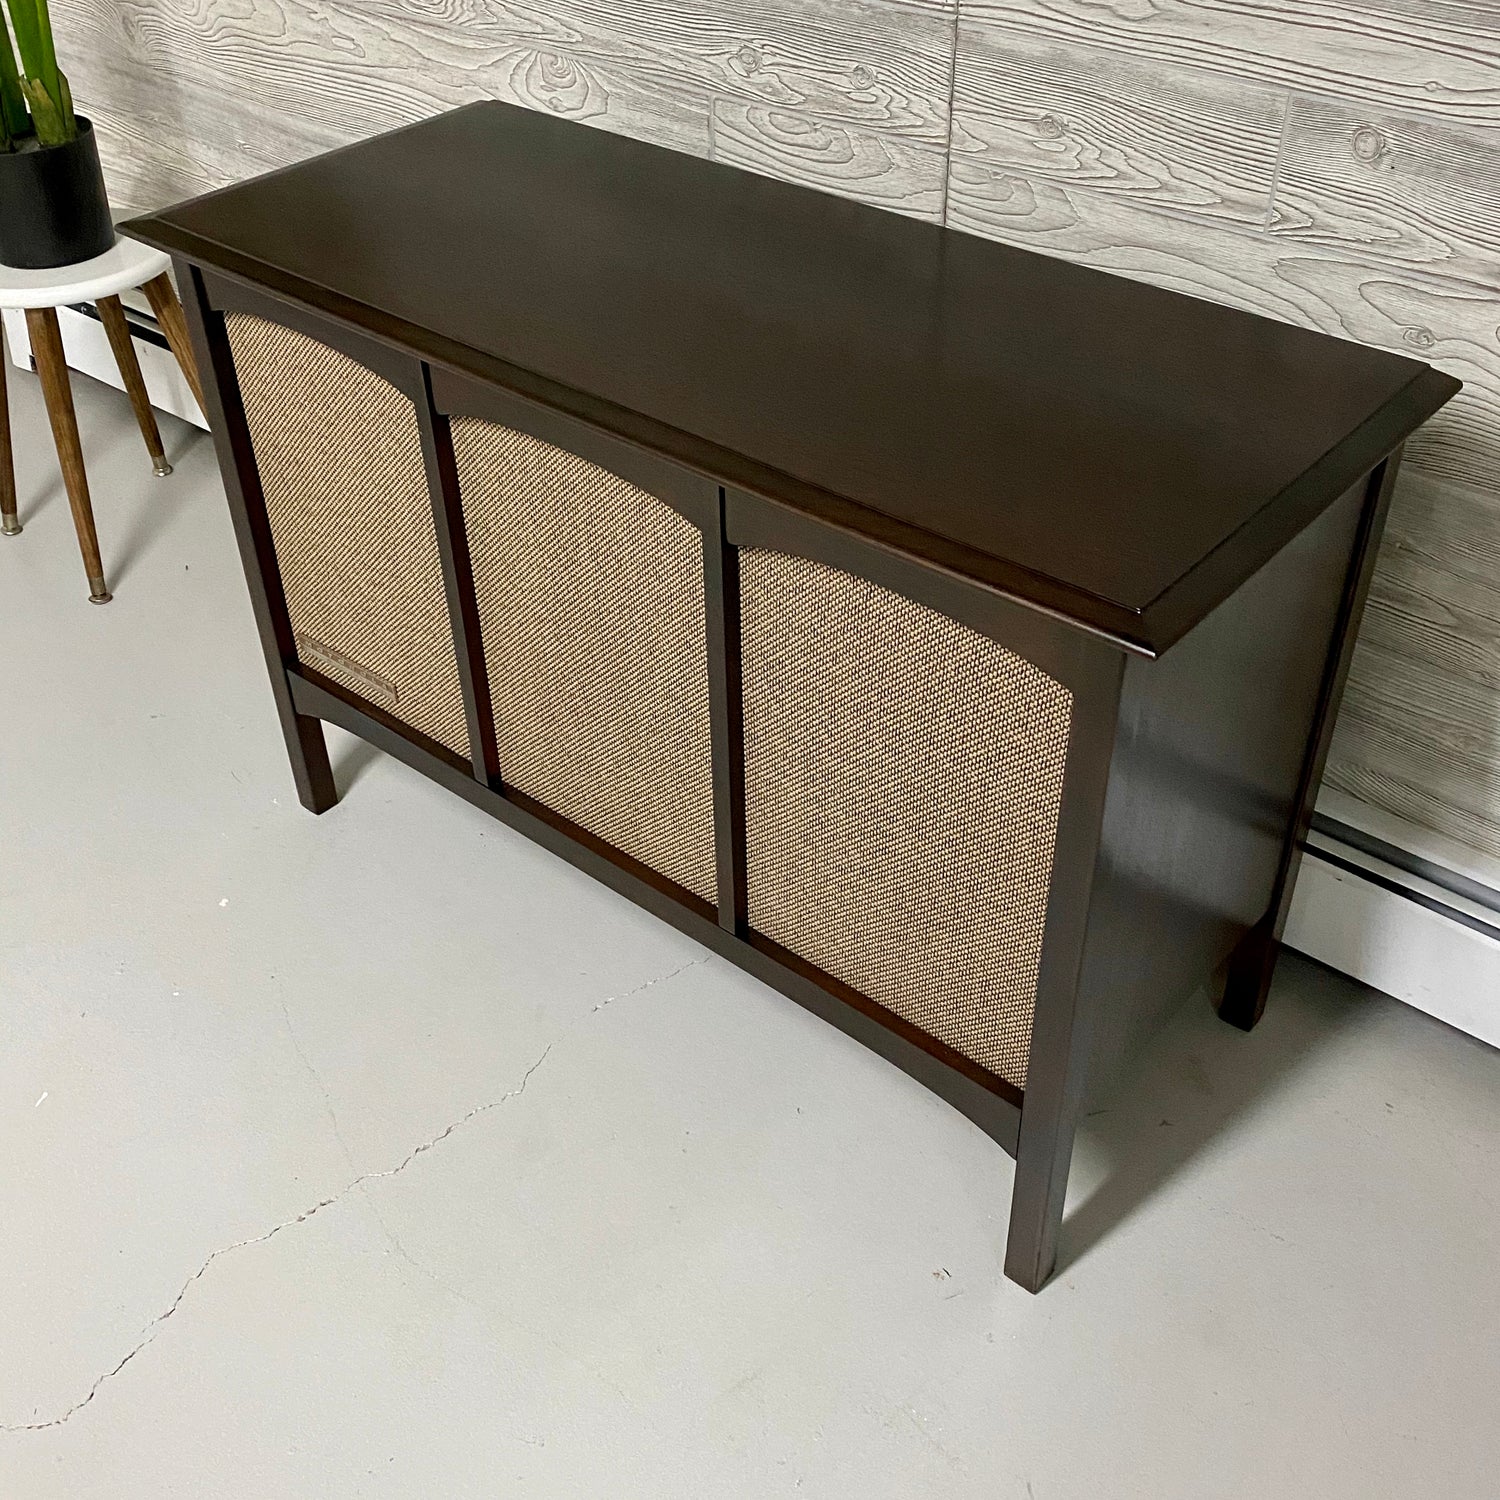 **SOLD OUT**  MOTOROLA 3-Channel Mid Century Vintage Stereo Console Record Player Changer AM FM Bluetooth Alexa The Vintedge Co.